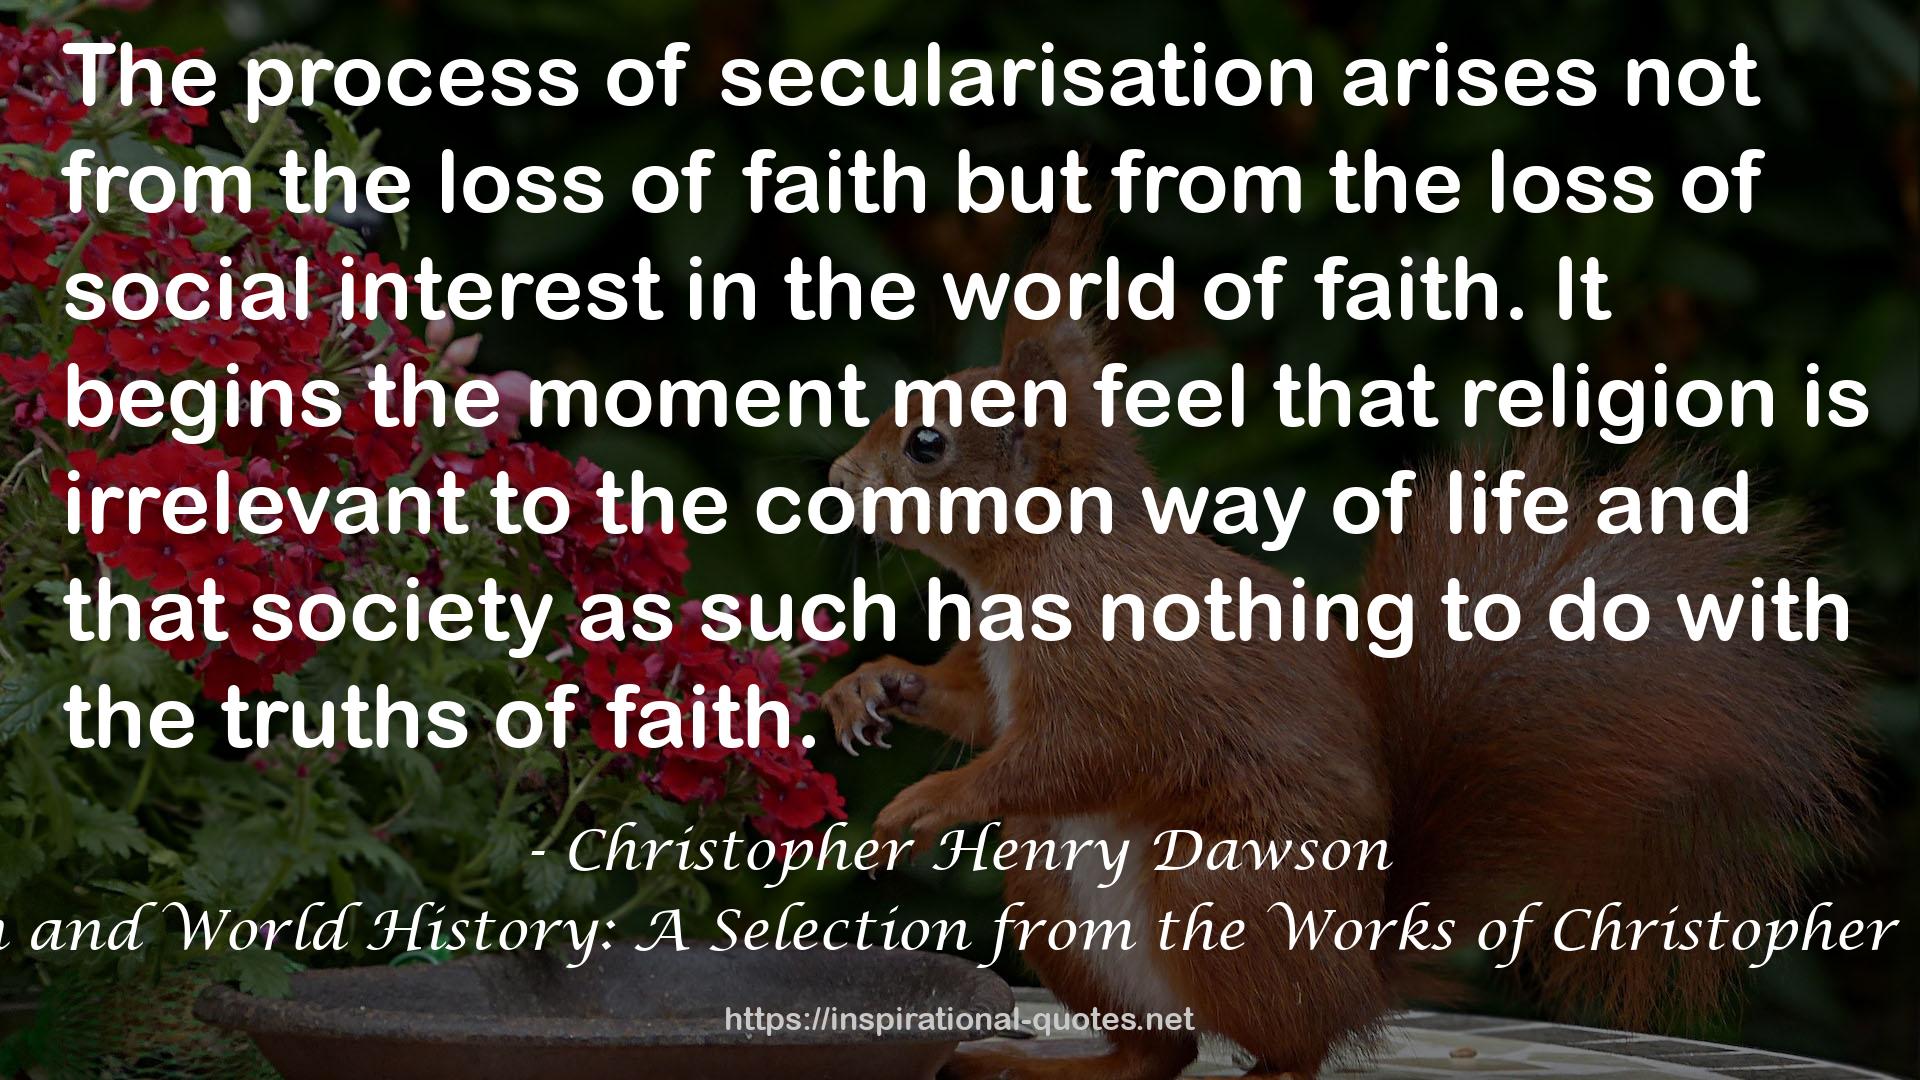 Religion and World History: A Selection from the Works of Christopher Dawson QUOTES